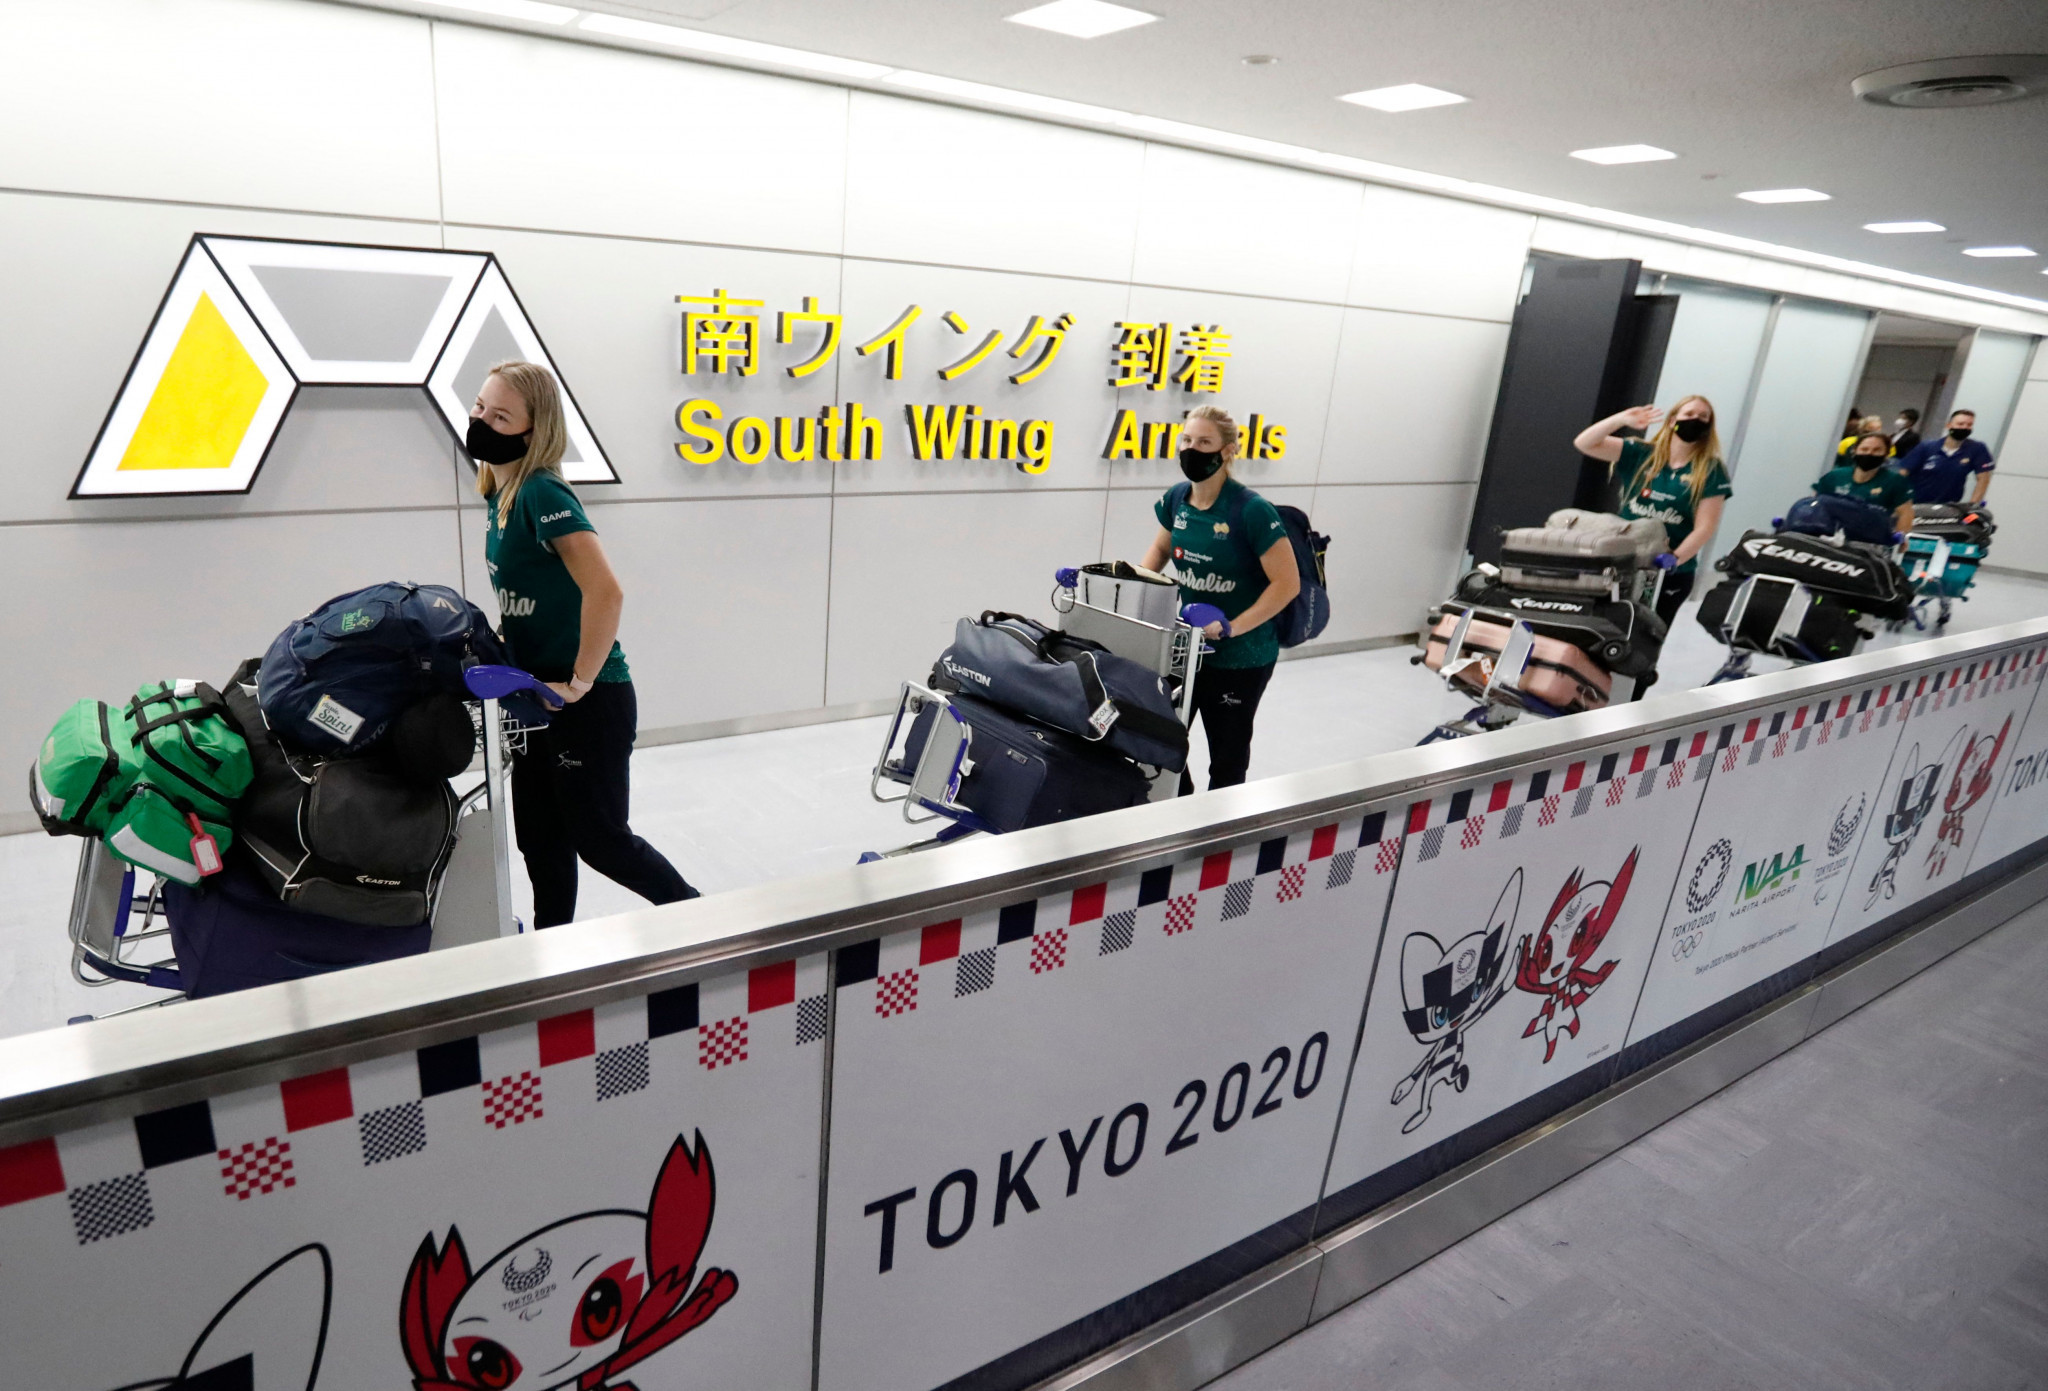 Tens of thousands of athletes, staff and journalists are set to arrive in Tokyo, increasing fears from the Japanese public and medical experts over potential COVID-19 outbreaks ©Getty Images